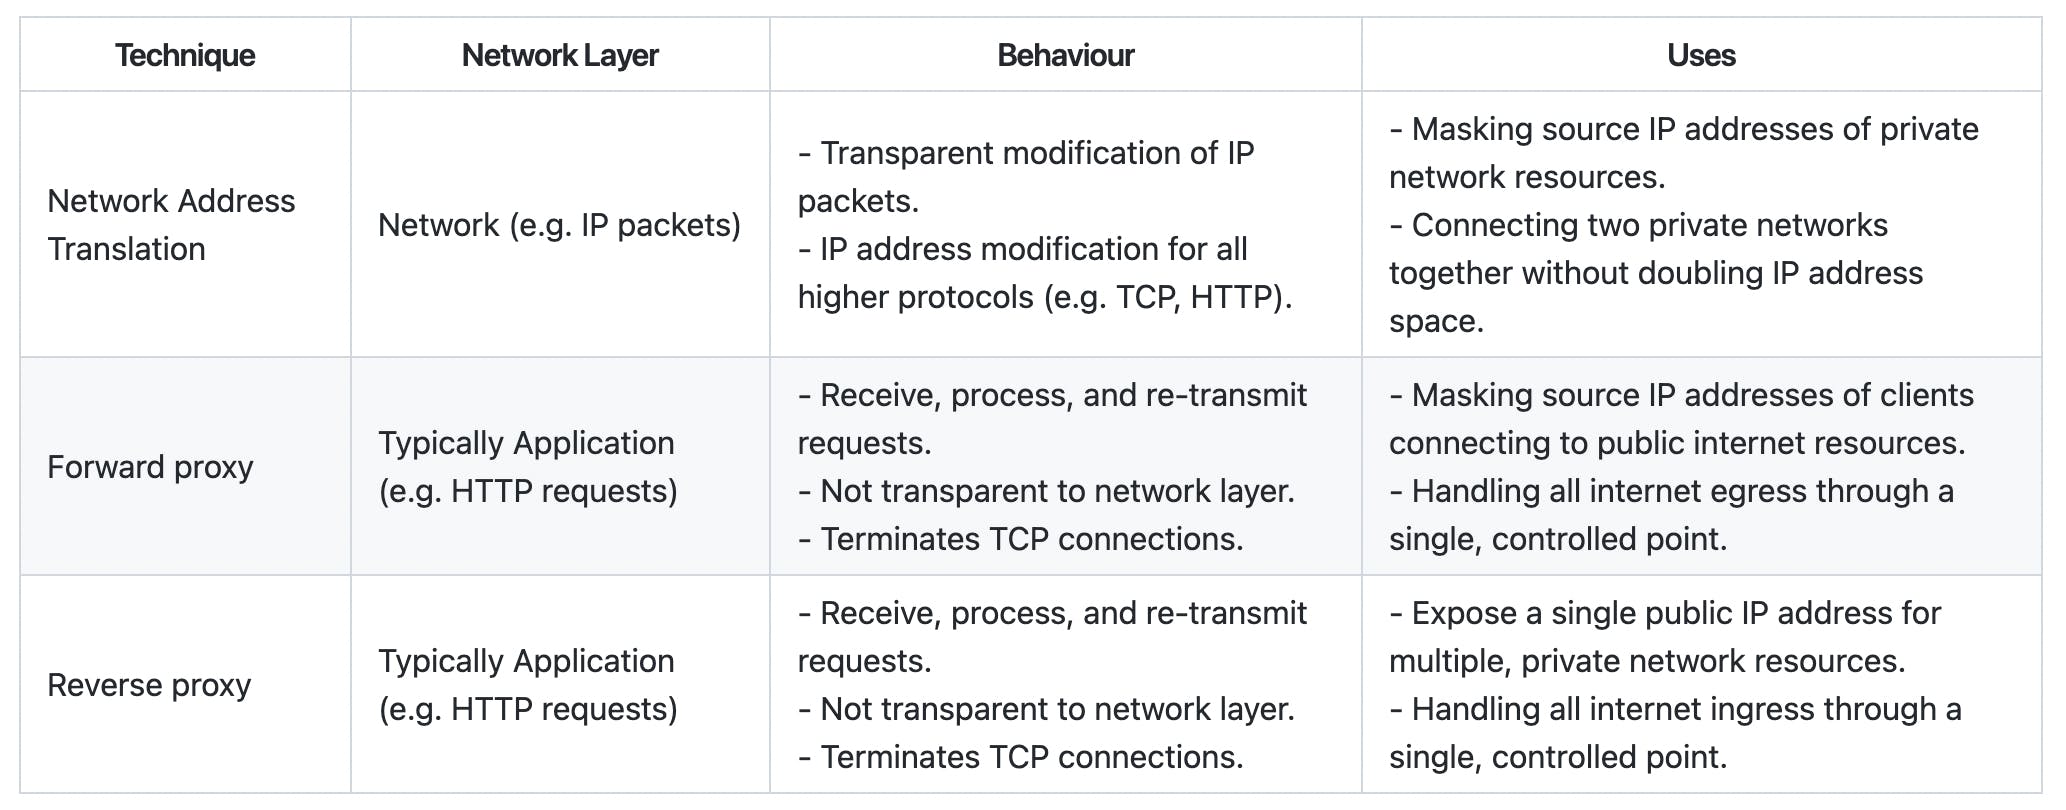 PROXY vs NAT - Understand the Difference - IP With Ease